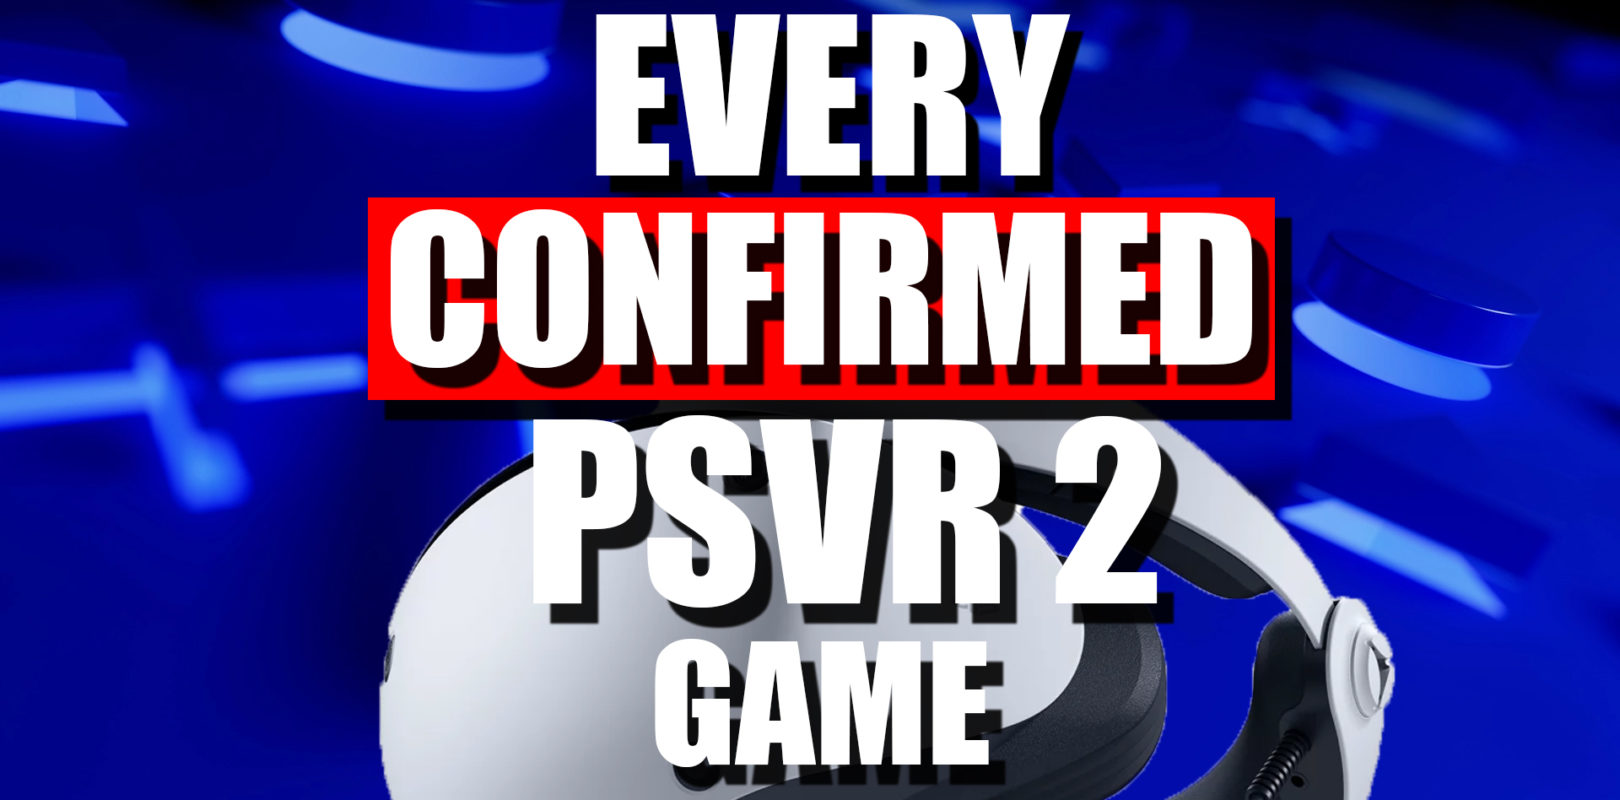 PSVR 2 Games: Every Launch Title Available Now & Announced Games